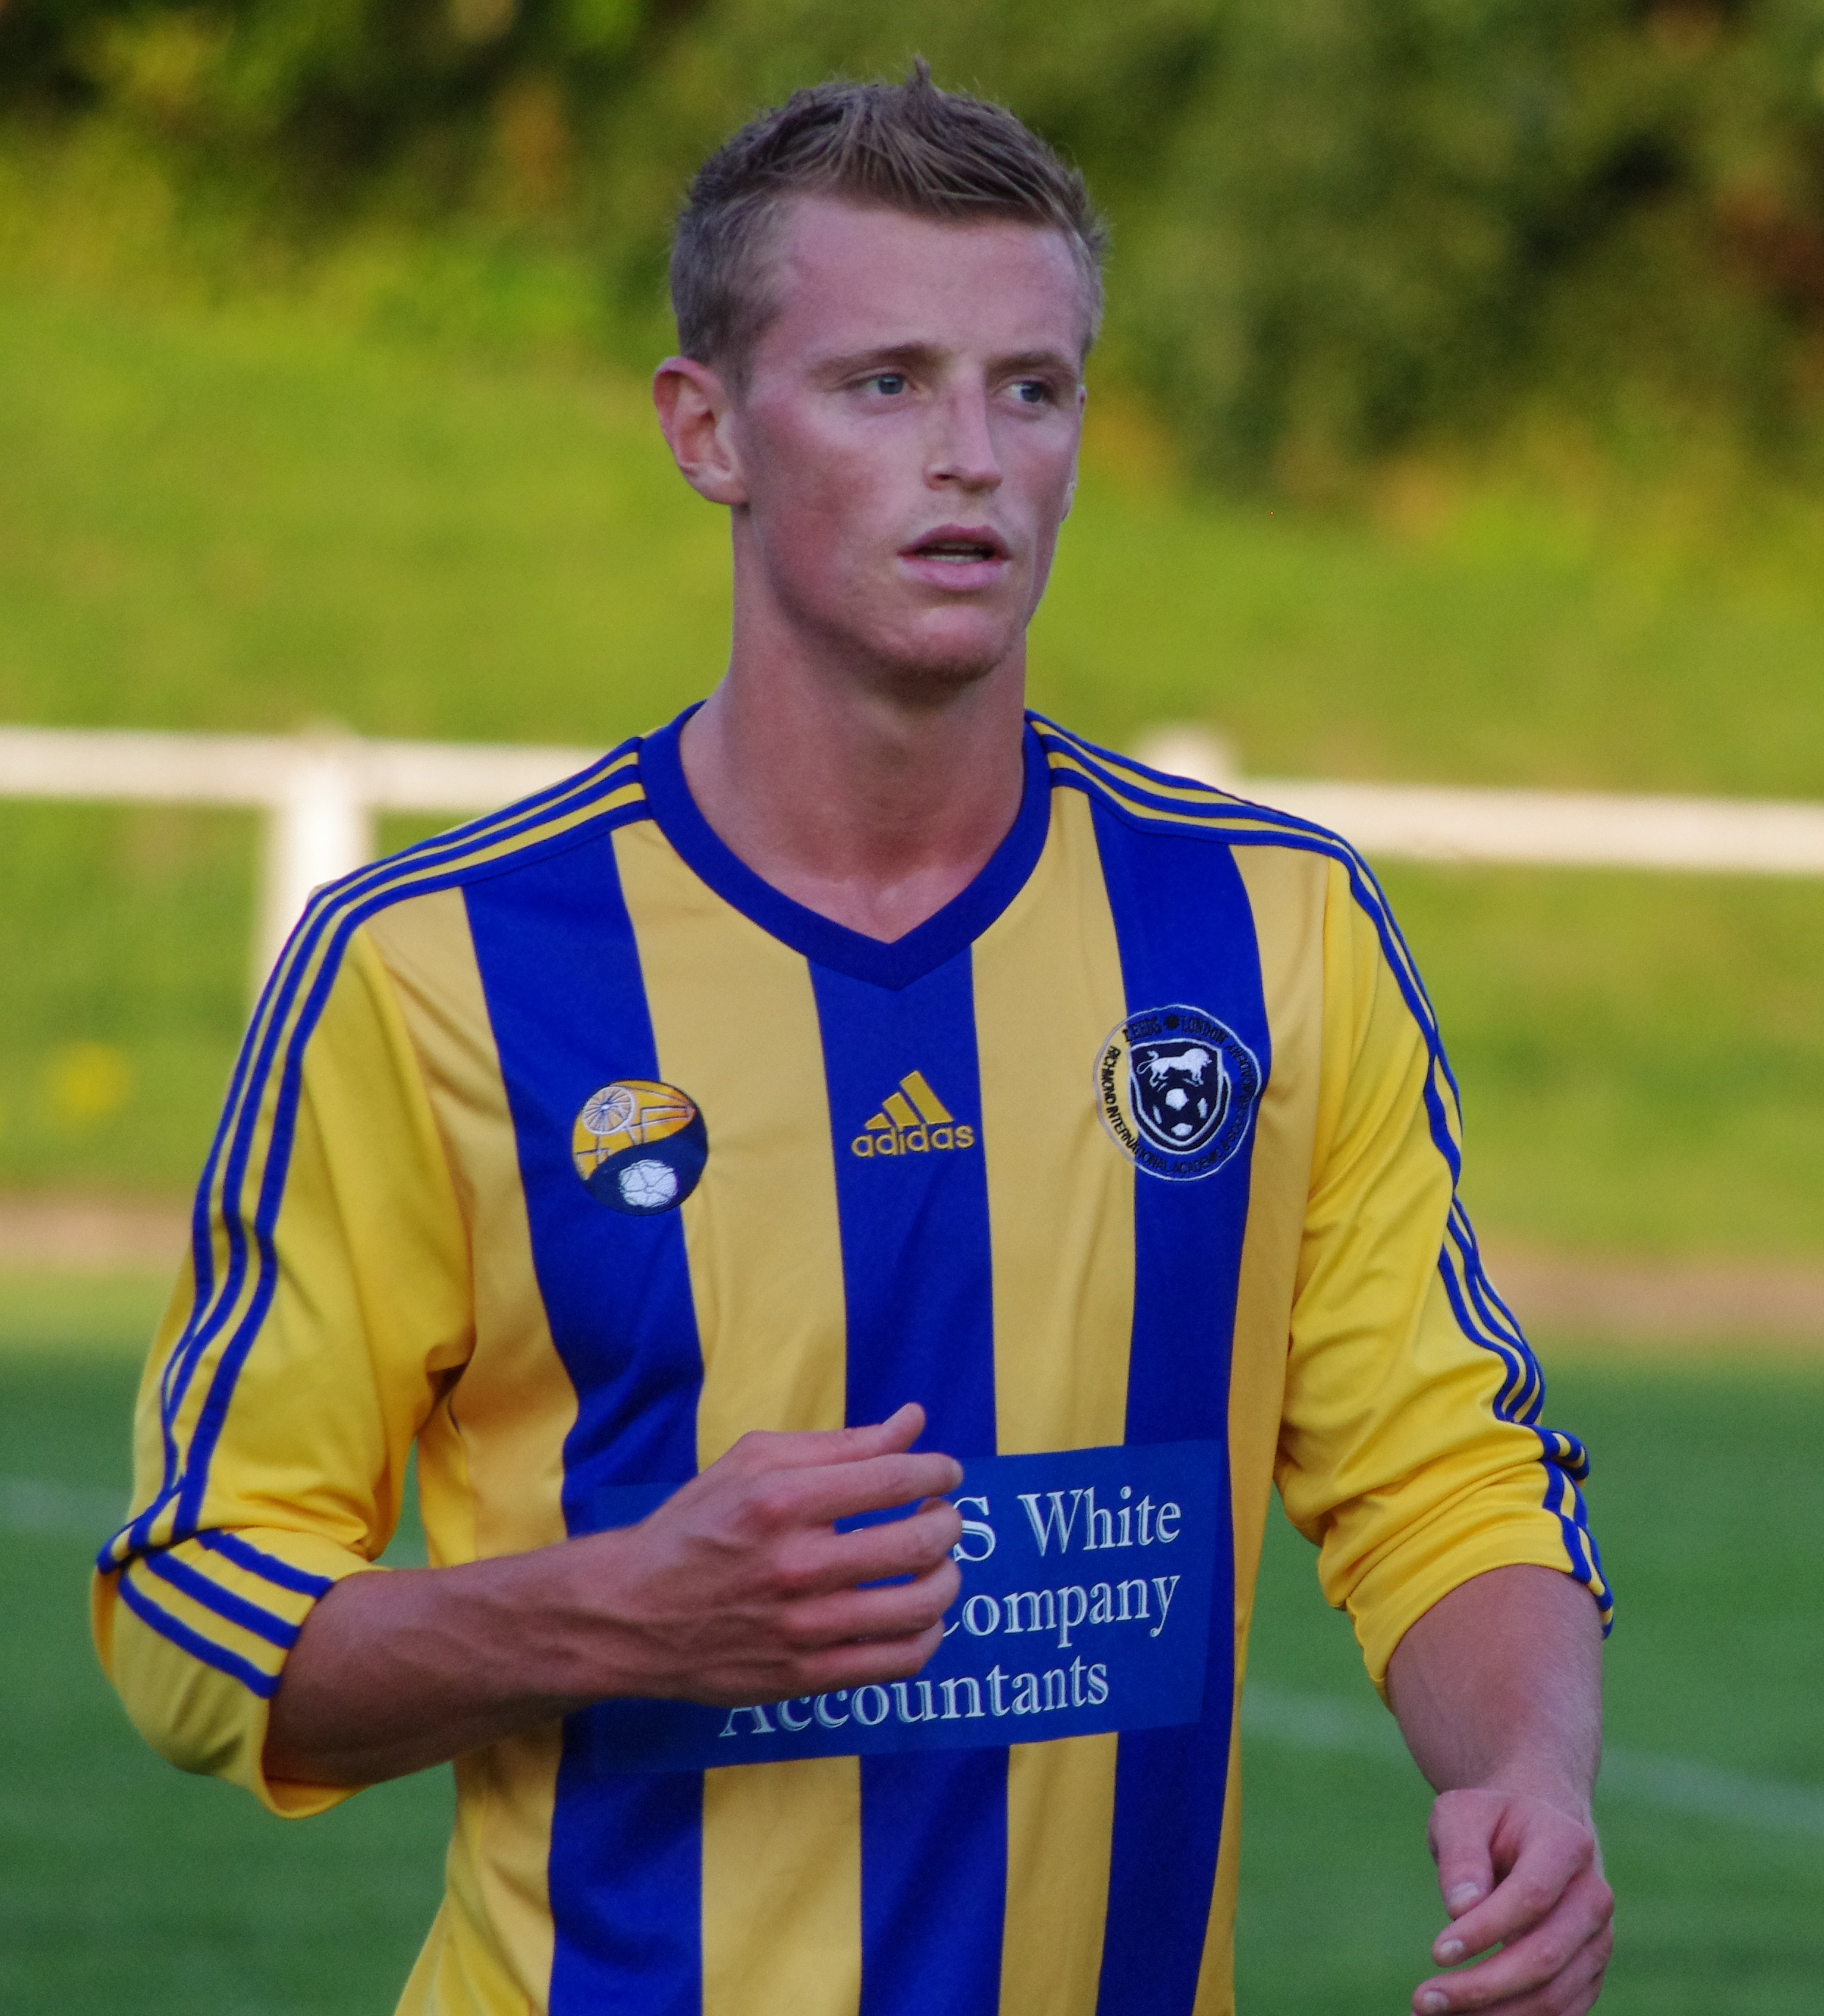 Nick Black could return for Garforth after four months out against Knaresborough Town